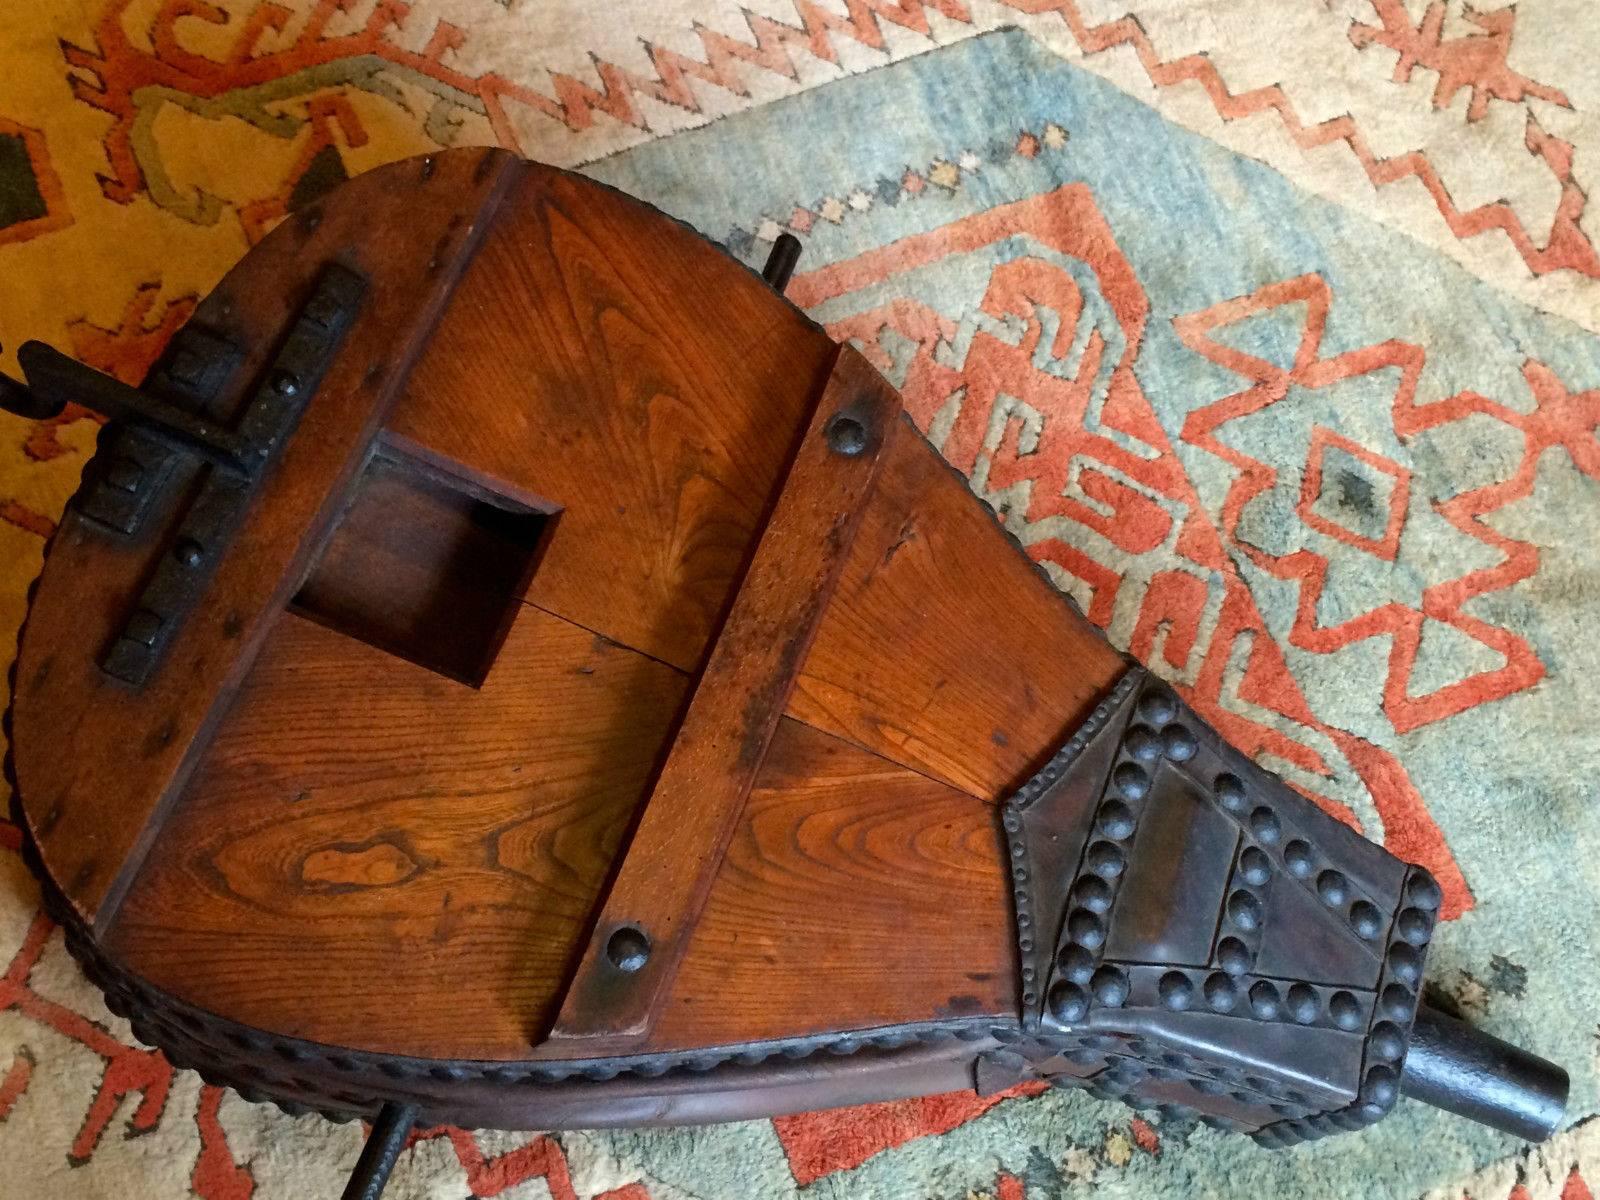 A large architectural reclaimed set of antique Victorian Blacksmiths Bellows early 19th century, Oak, Leather and steel, very industrial looking and extremely stylish.